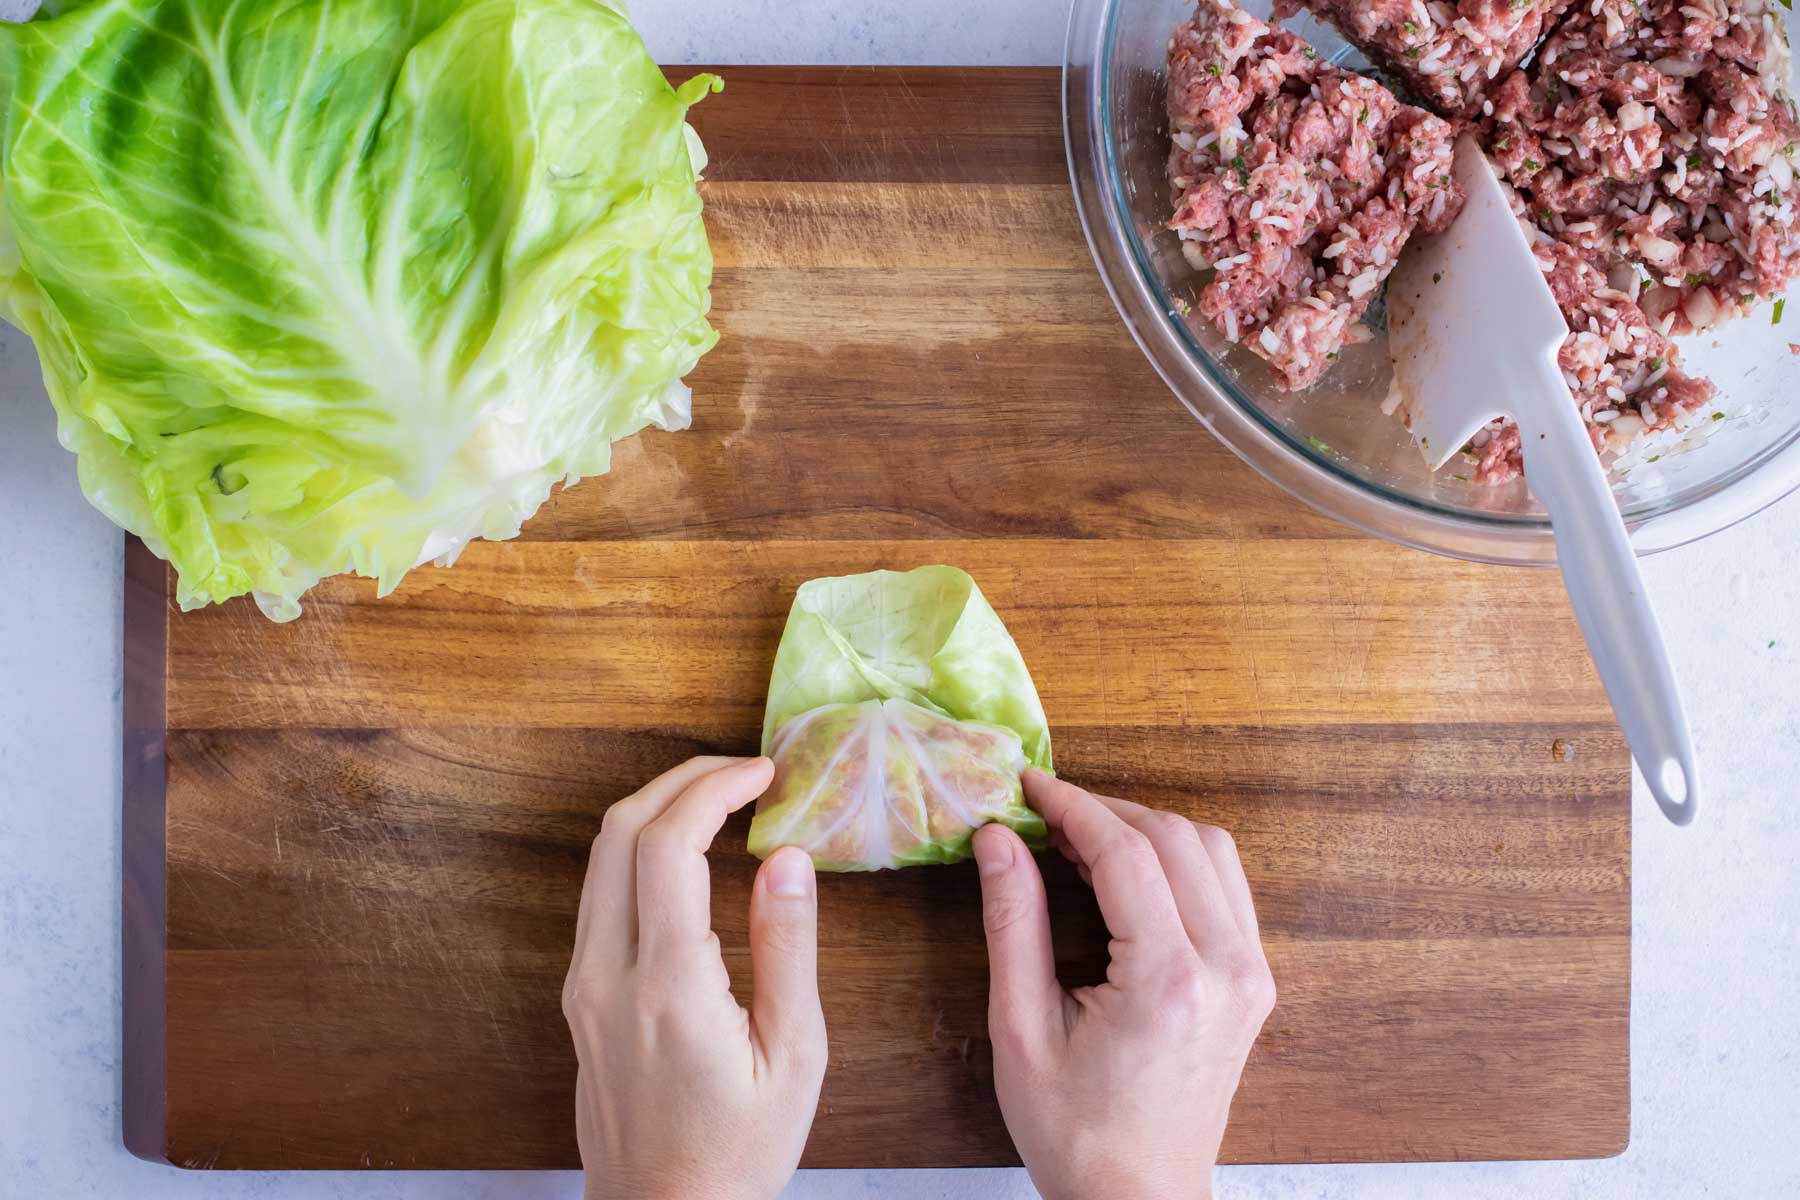 Cabbage leaf with filling is rolled in